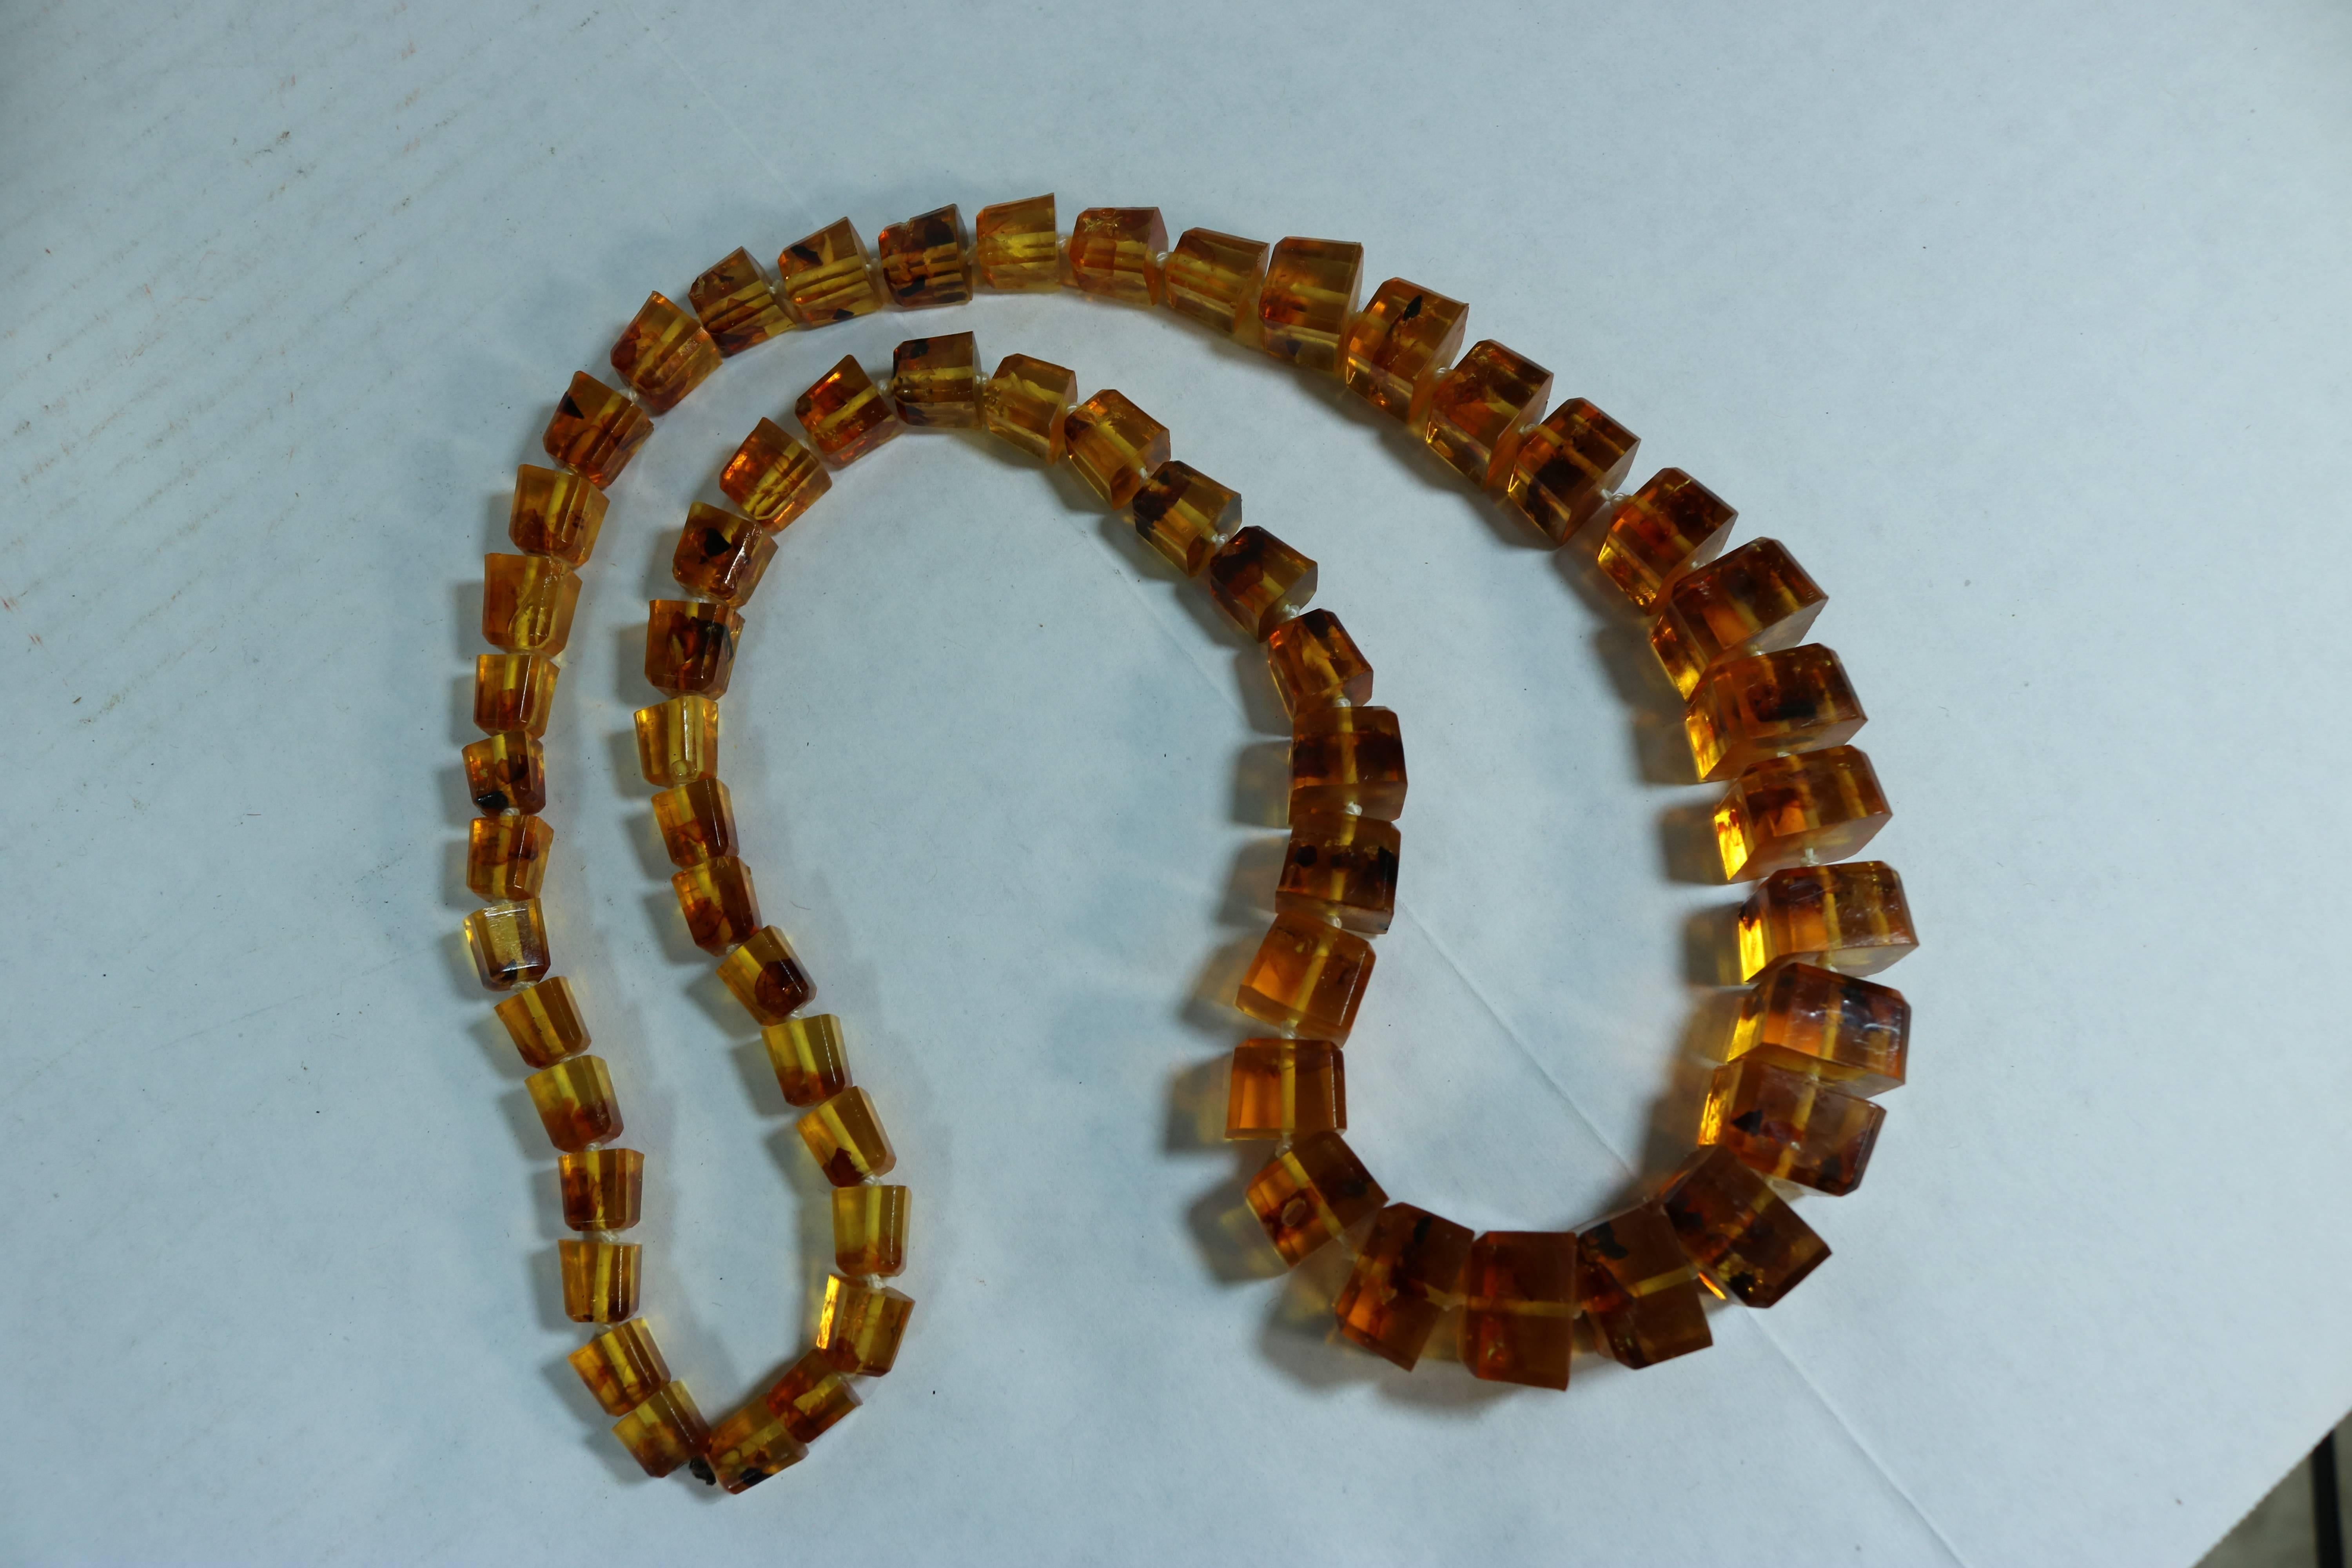 Stunning very long amber knotted necklace. This amber necklace example is a good quality piece in inclusions, clarity and overall aesthetic appeal.
Amber jewelry is currently very ‘hot’ and sought after today by fashionistas.

Measure: 15 1/2”